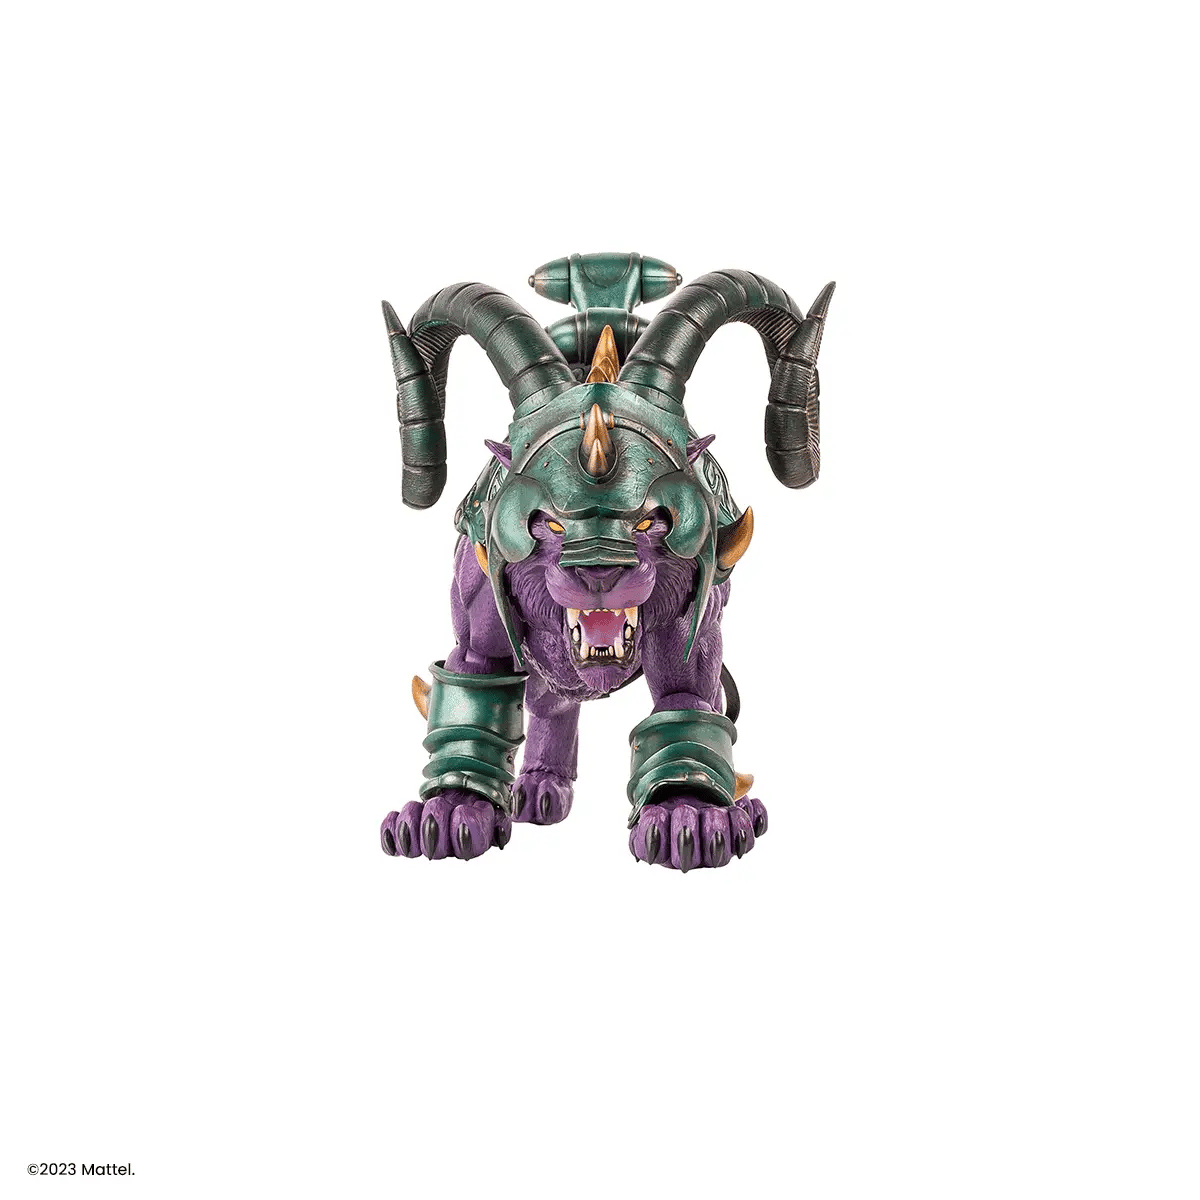 Masters of the Universe: Panthor 1:6 Scale Figure